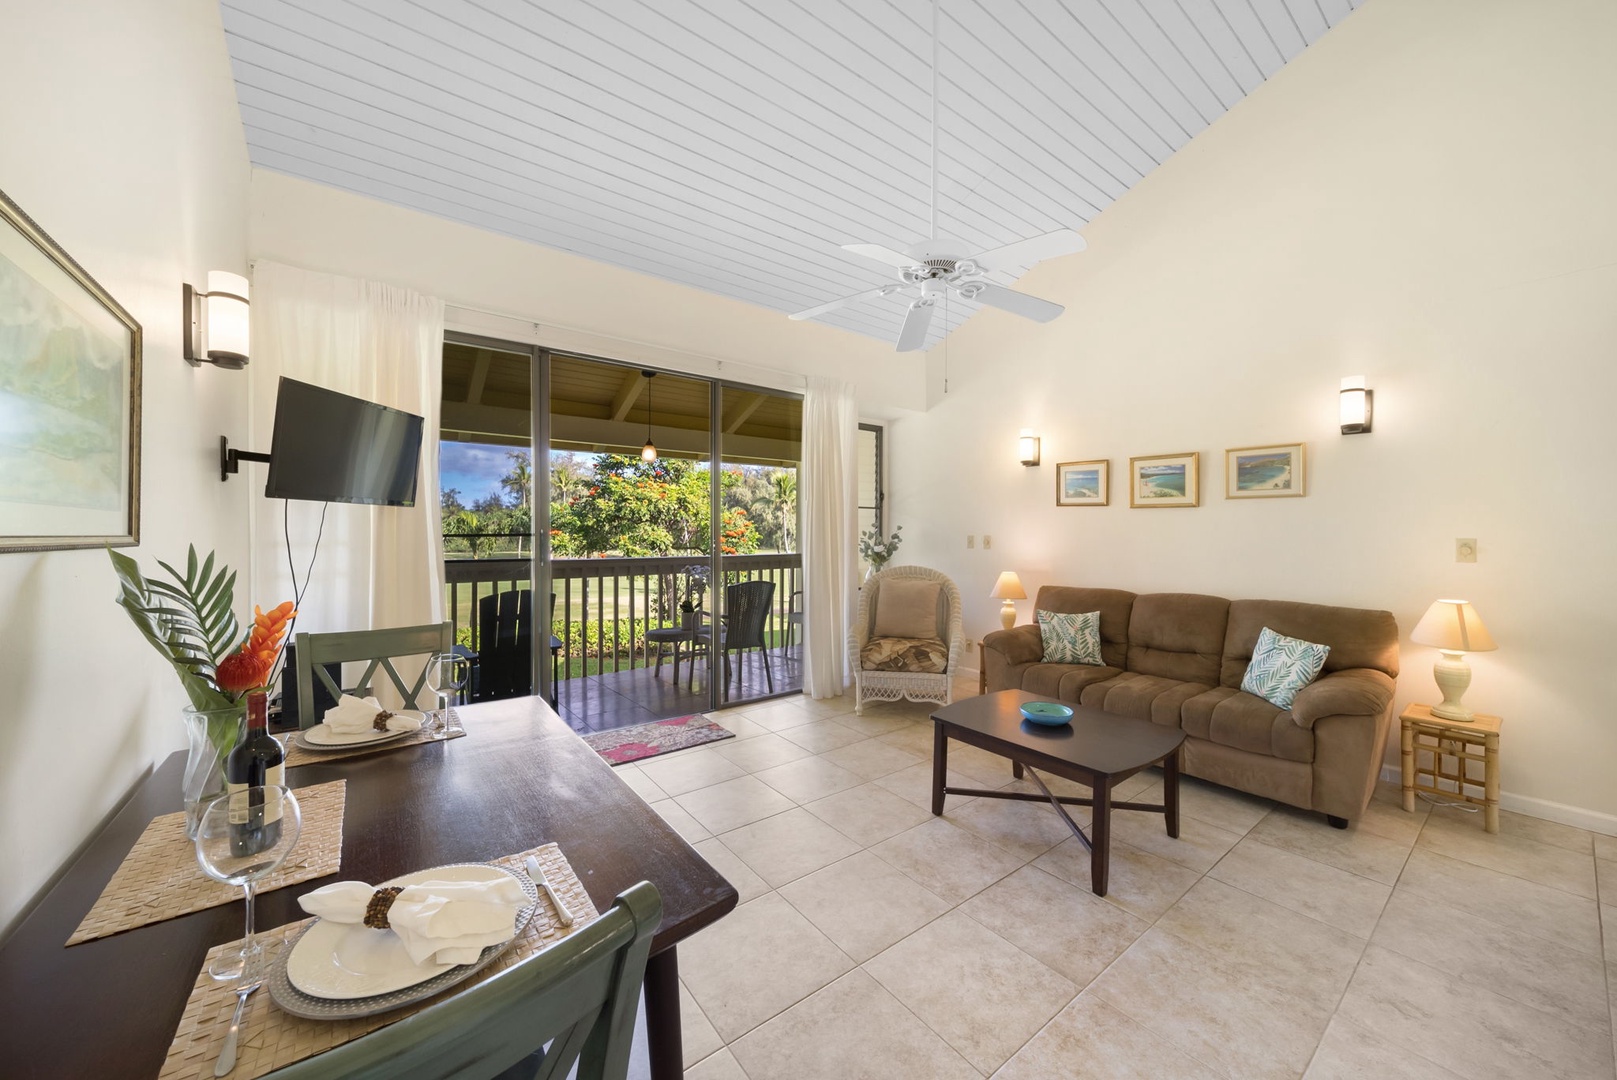 Kahuku Vacation Rentals, Kuilima Estates East #164 - Living and dining space are perfect to rest after a day exploring the island